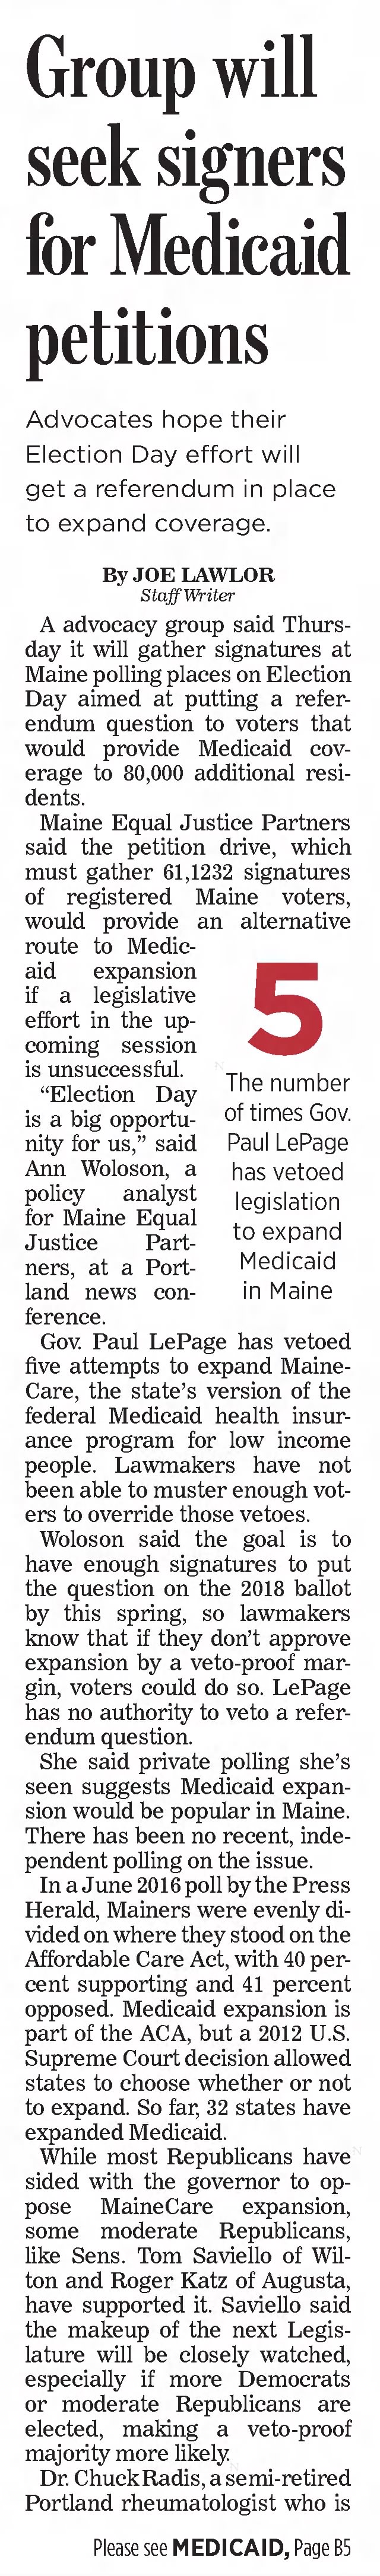 Medicaid expansion in Maine